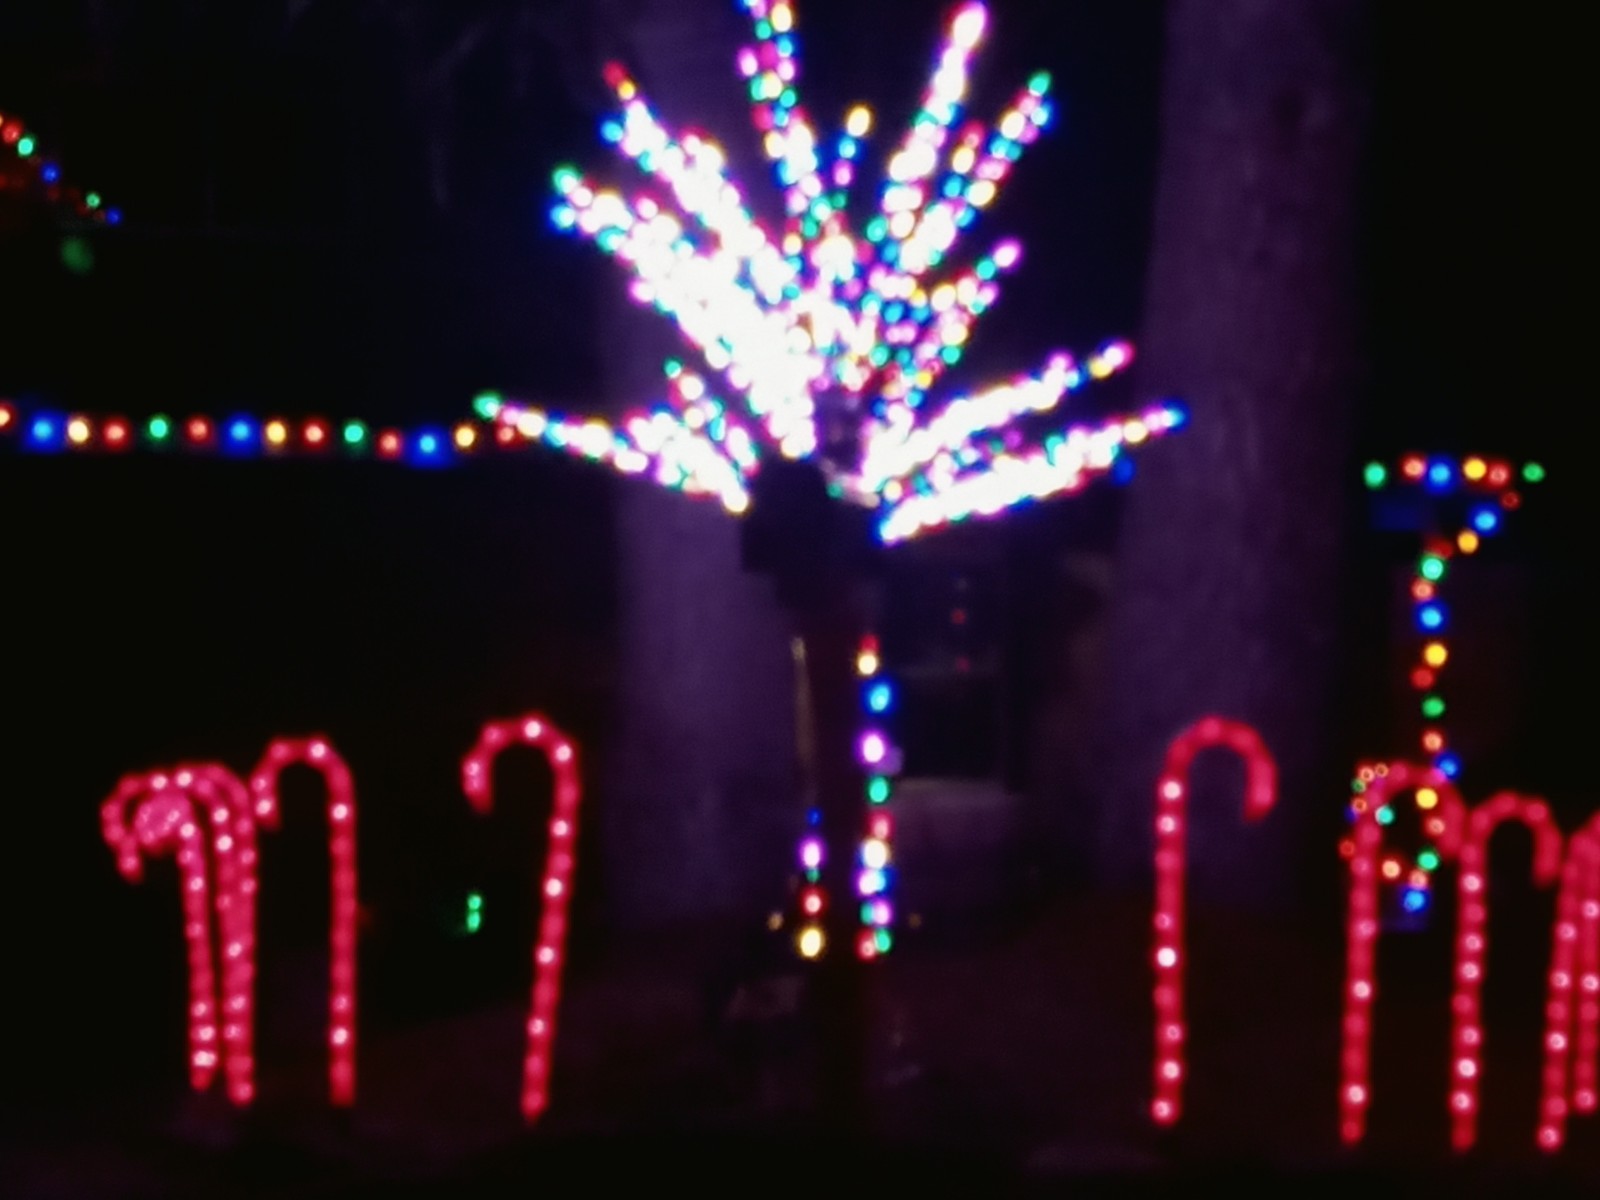 Pierce County 2020 Holiday Lights Dazzle and Delight - SouthSoundTalk